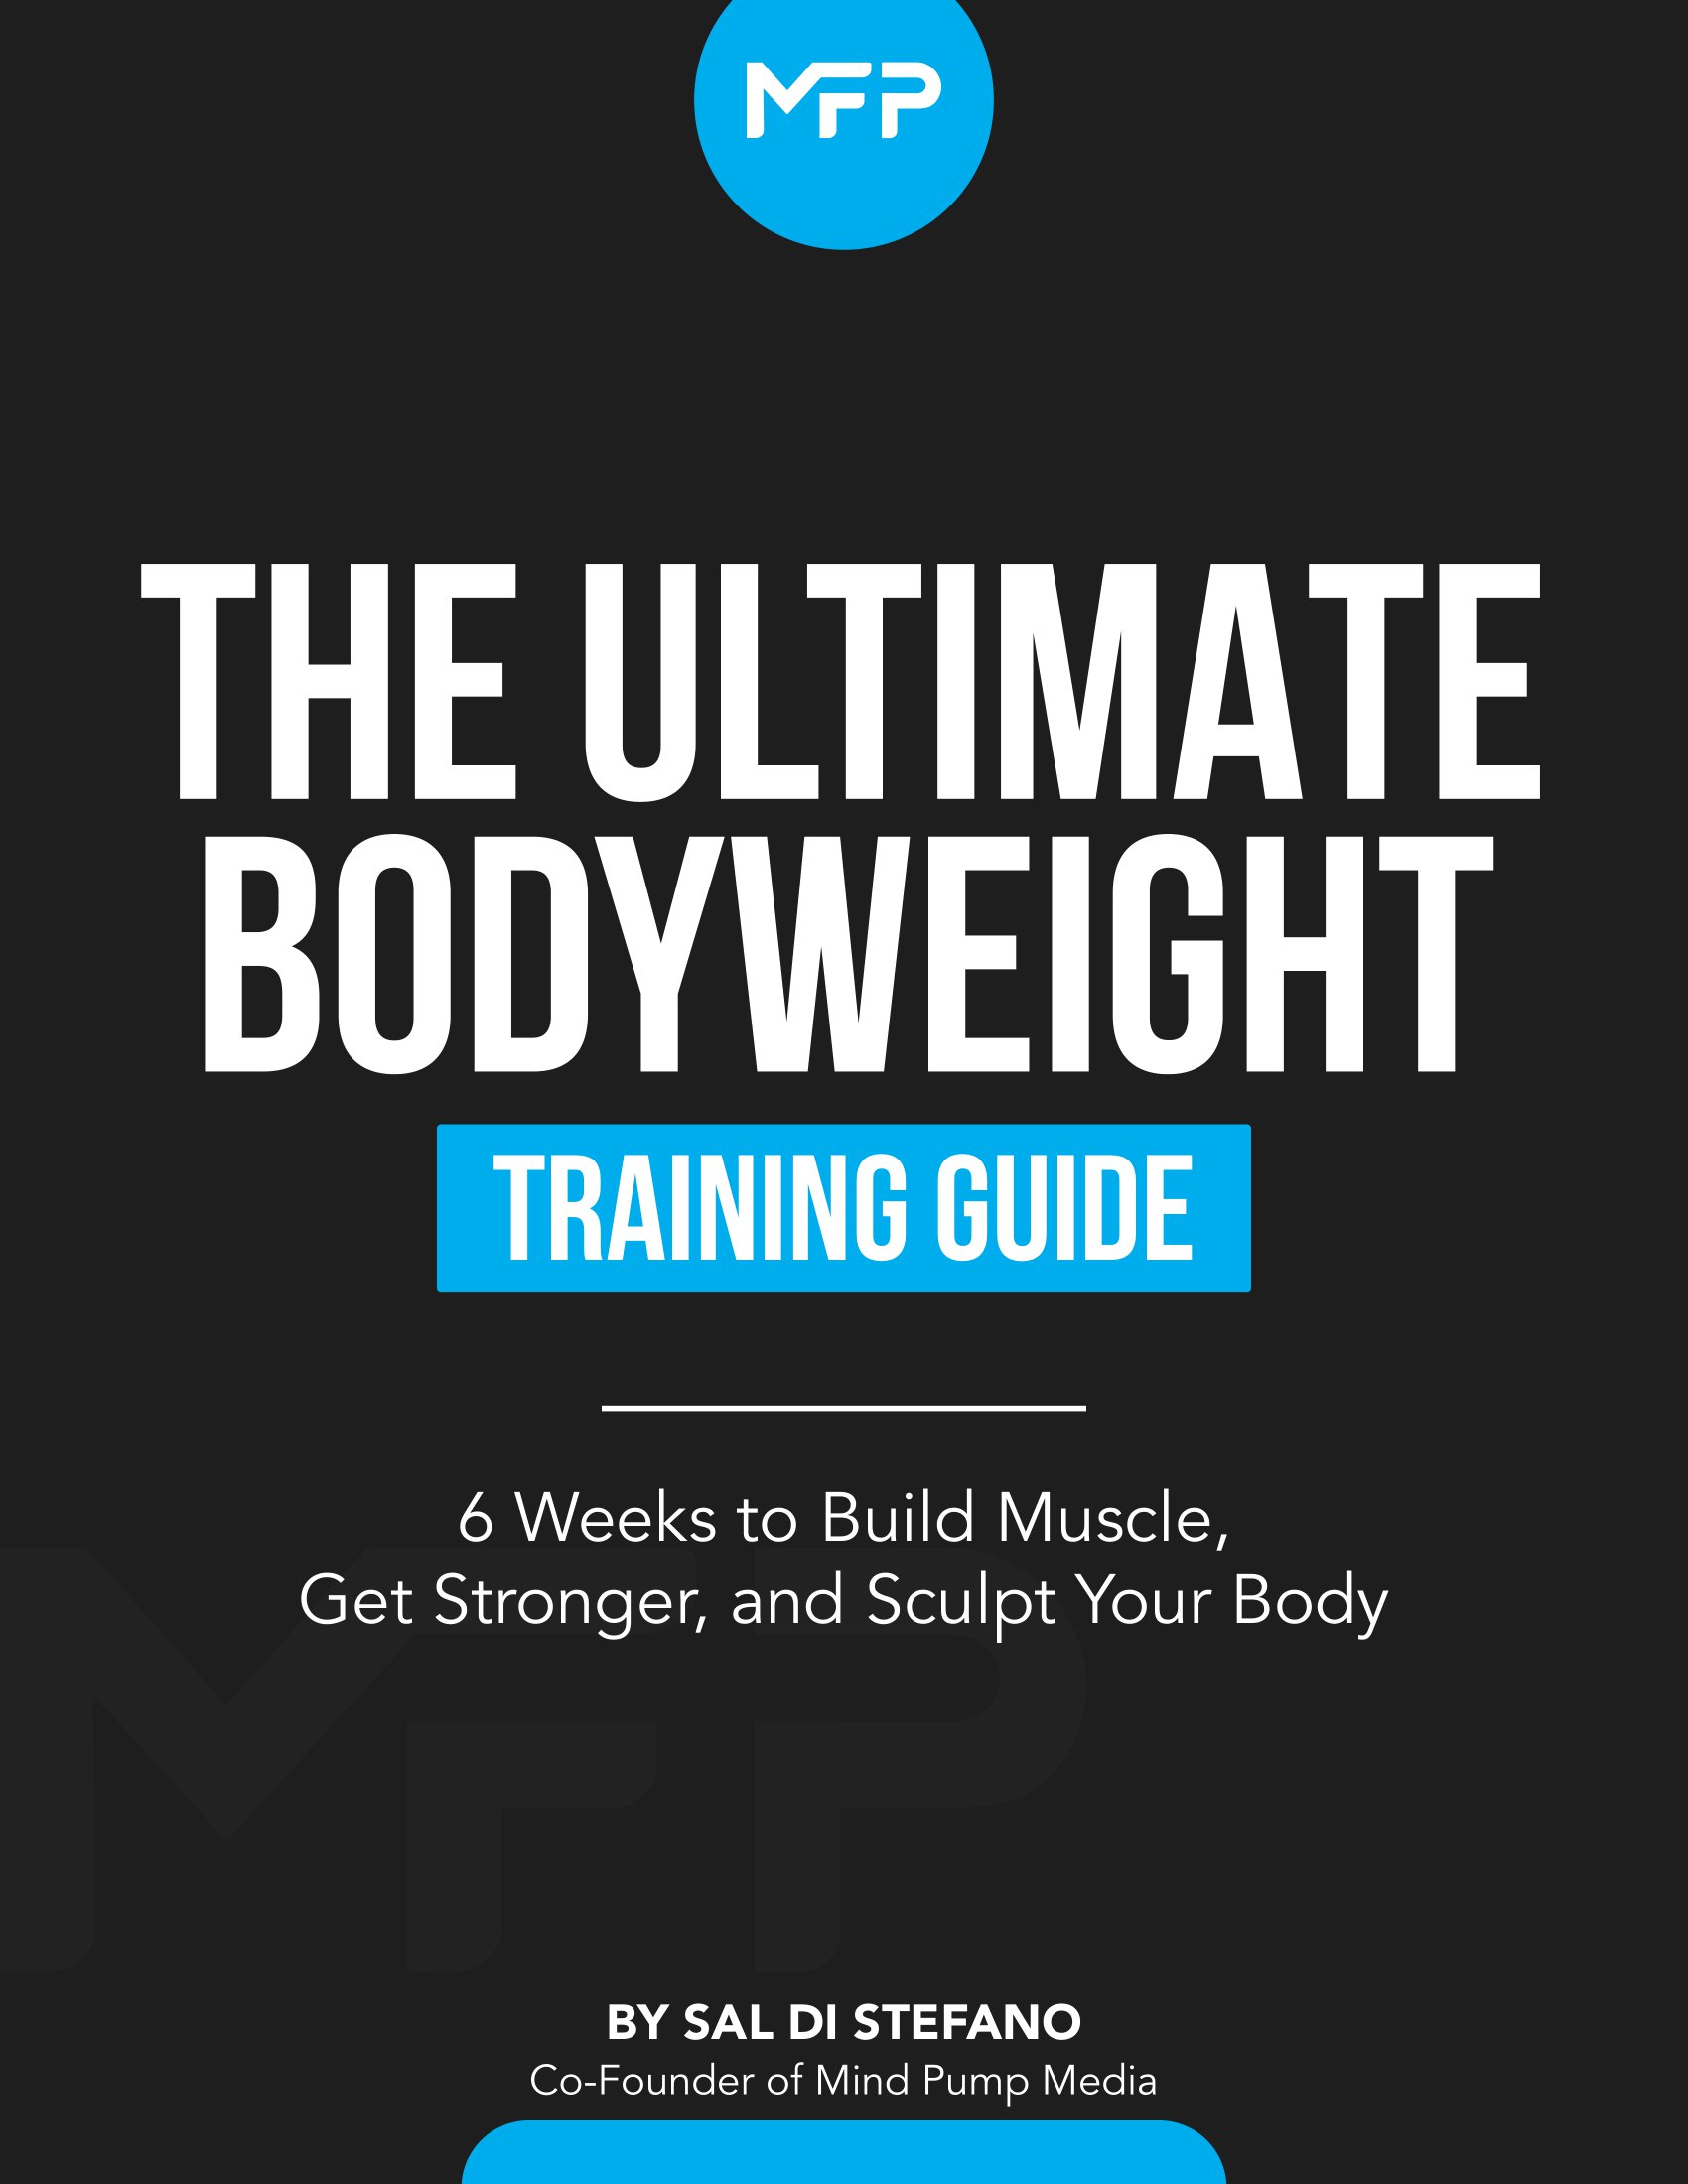 The Ultimate Bodyweight Training Guide